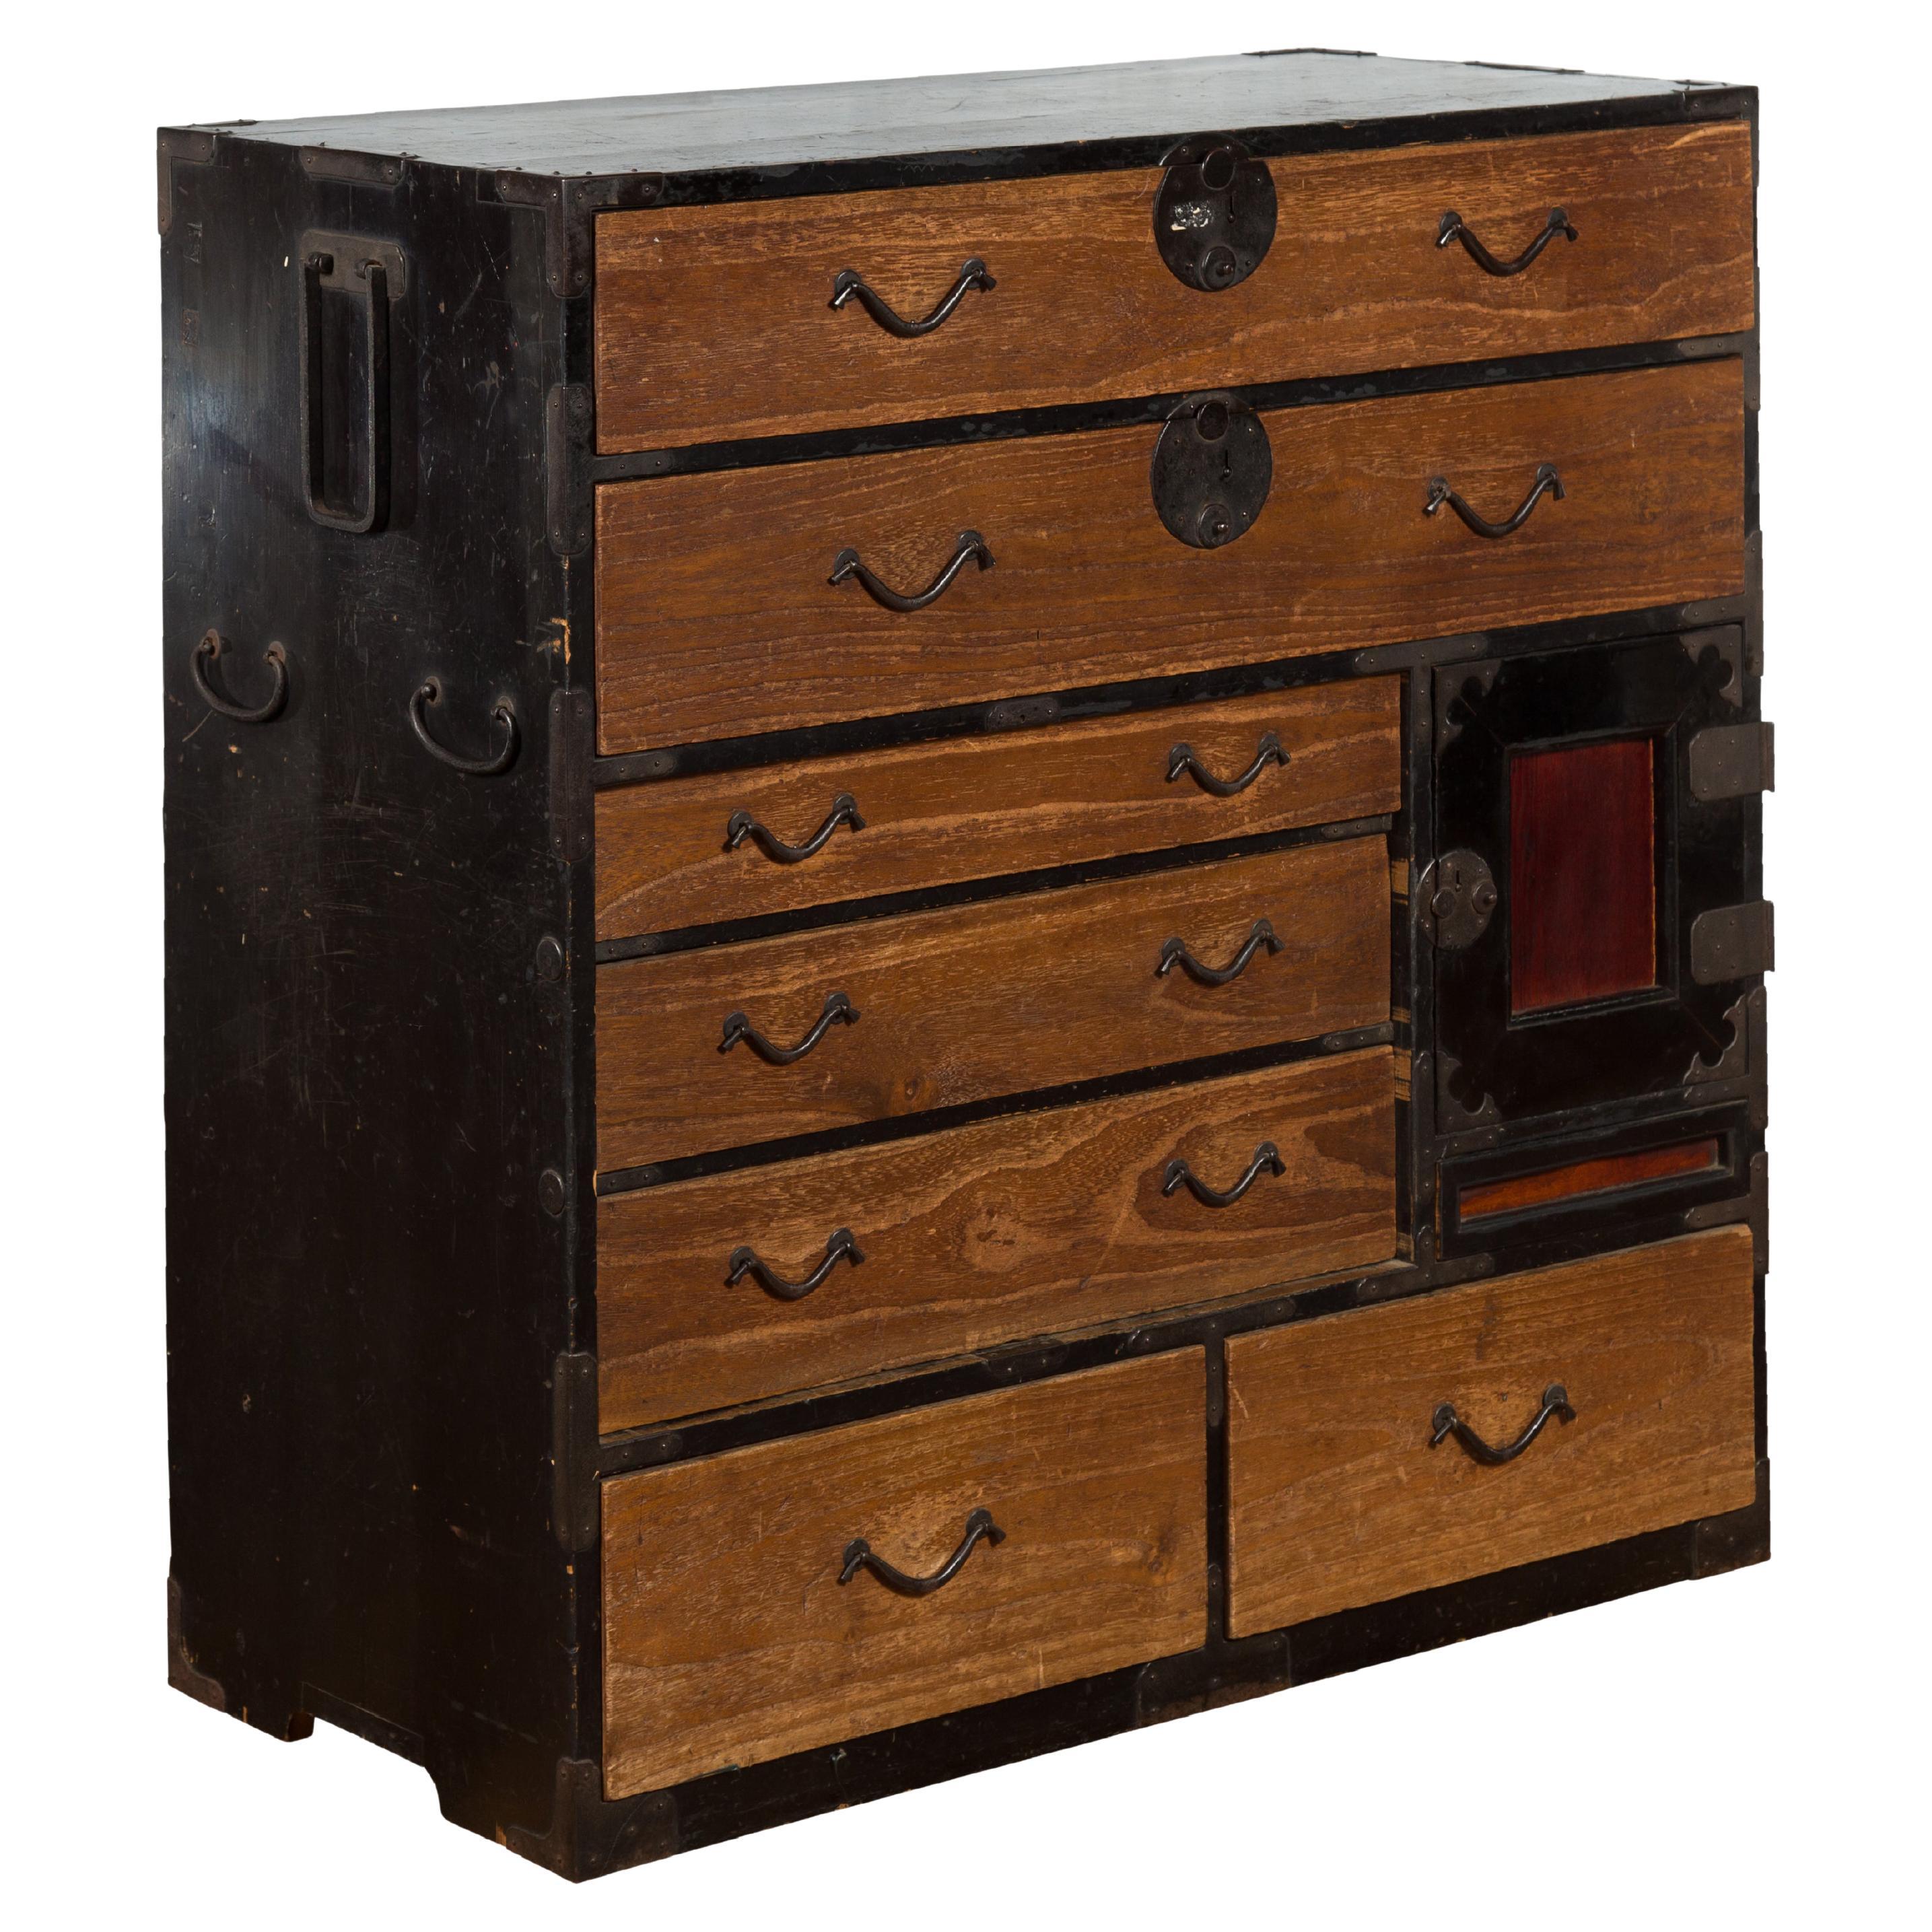 Japanese 19th Century Meiji Period Brown and Black Tansu Clothing Chest For Sale